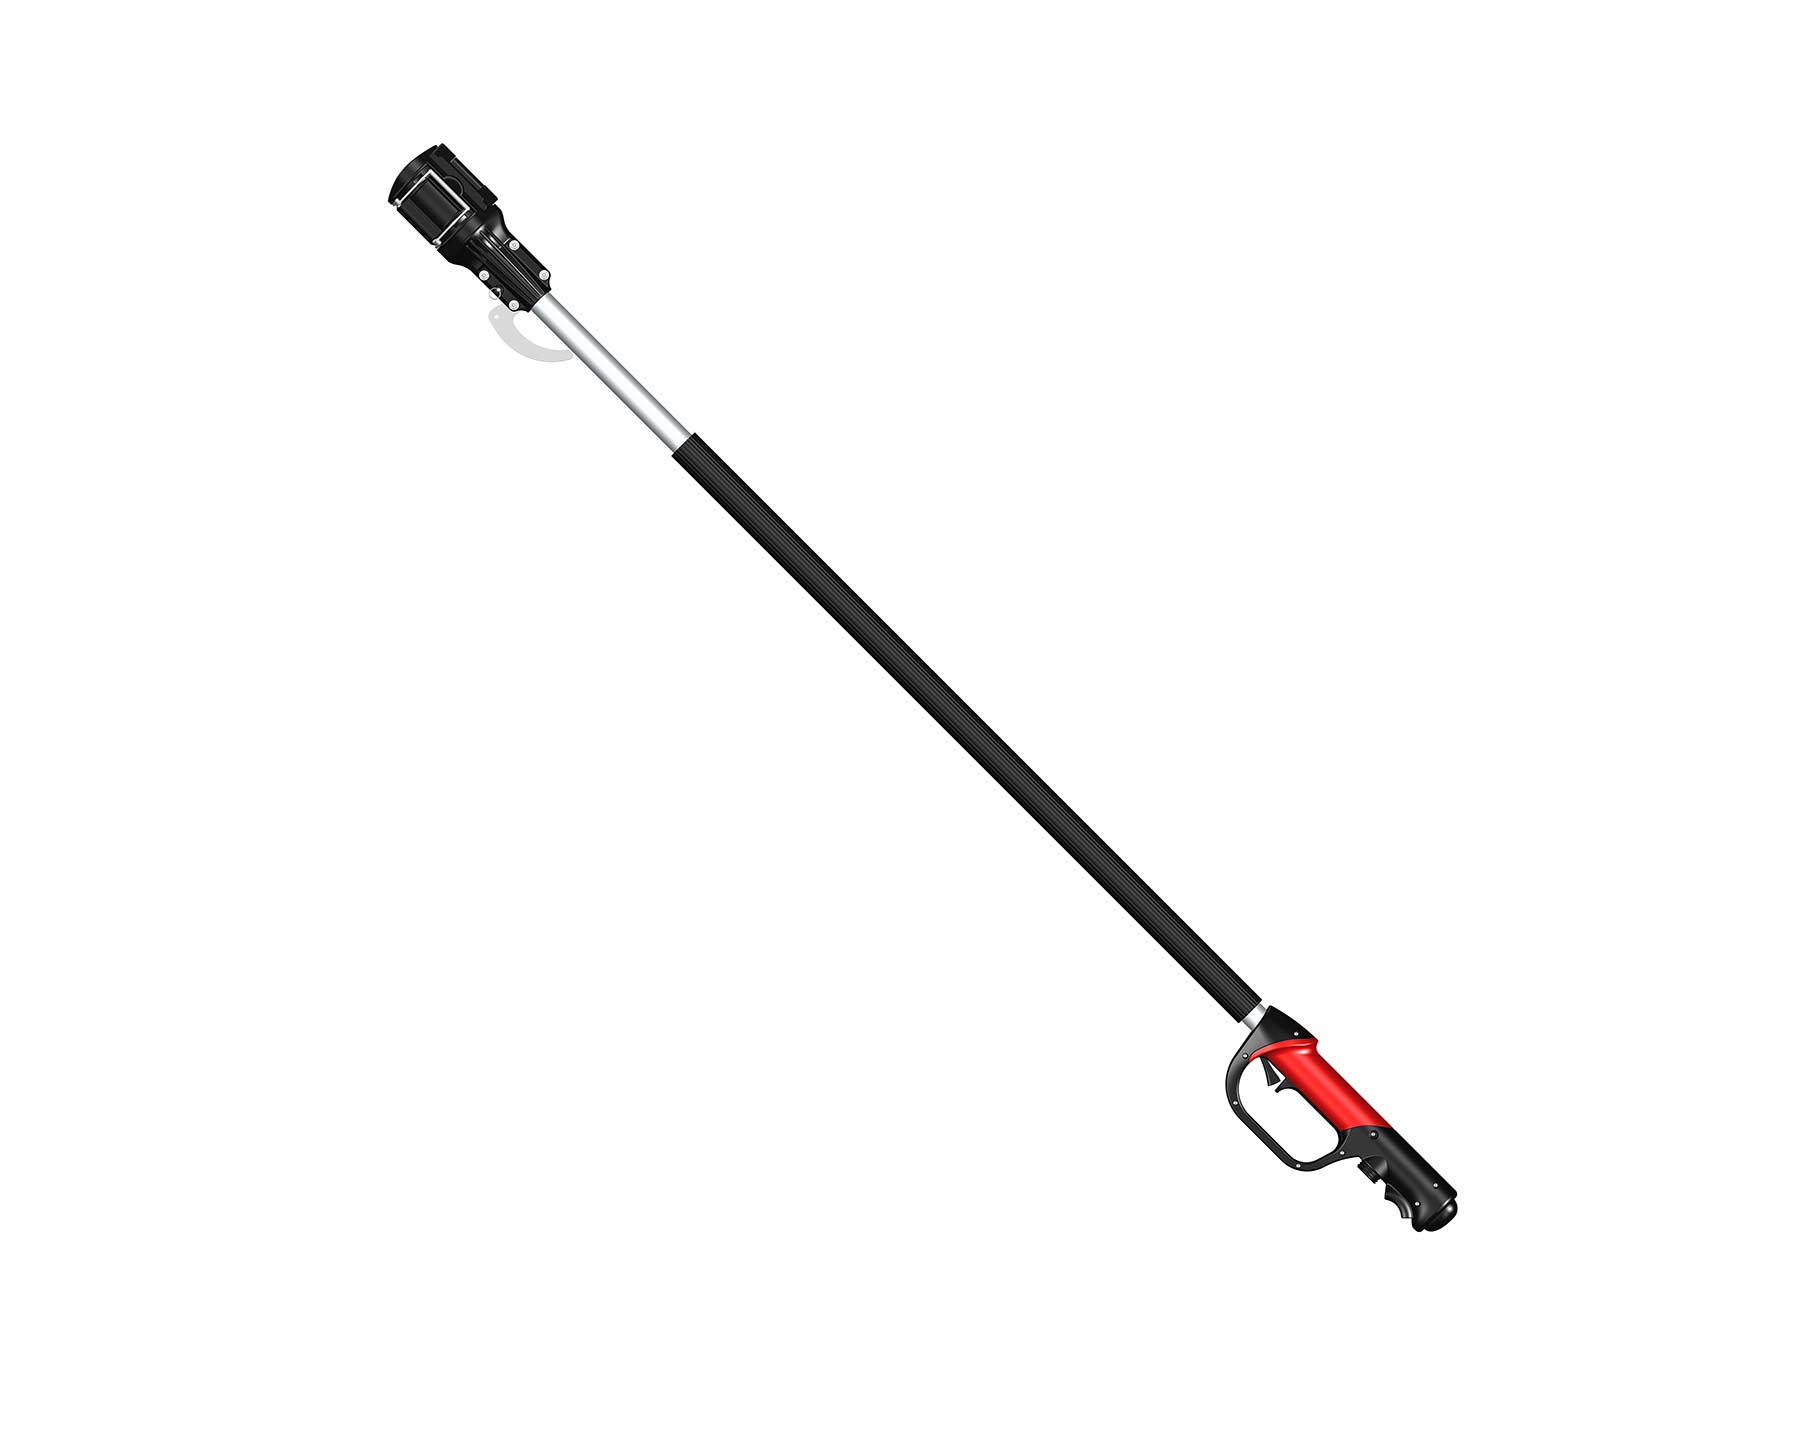 150cm Extension pole for use with Felco Power Blade electric pruners